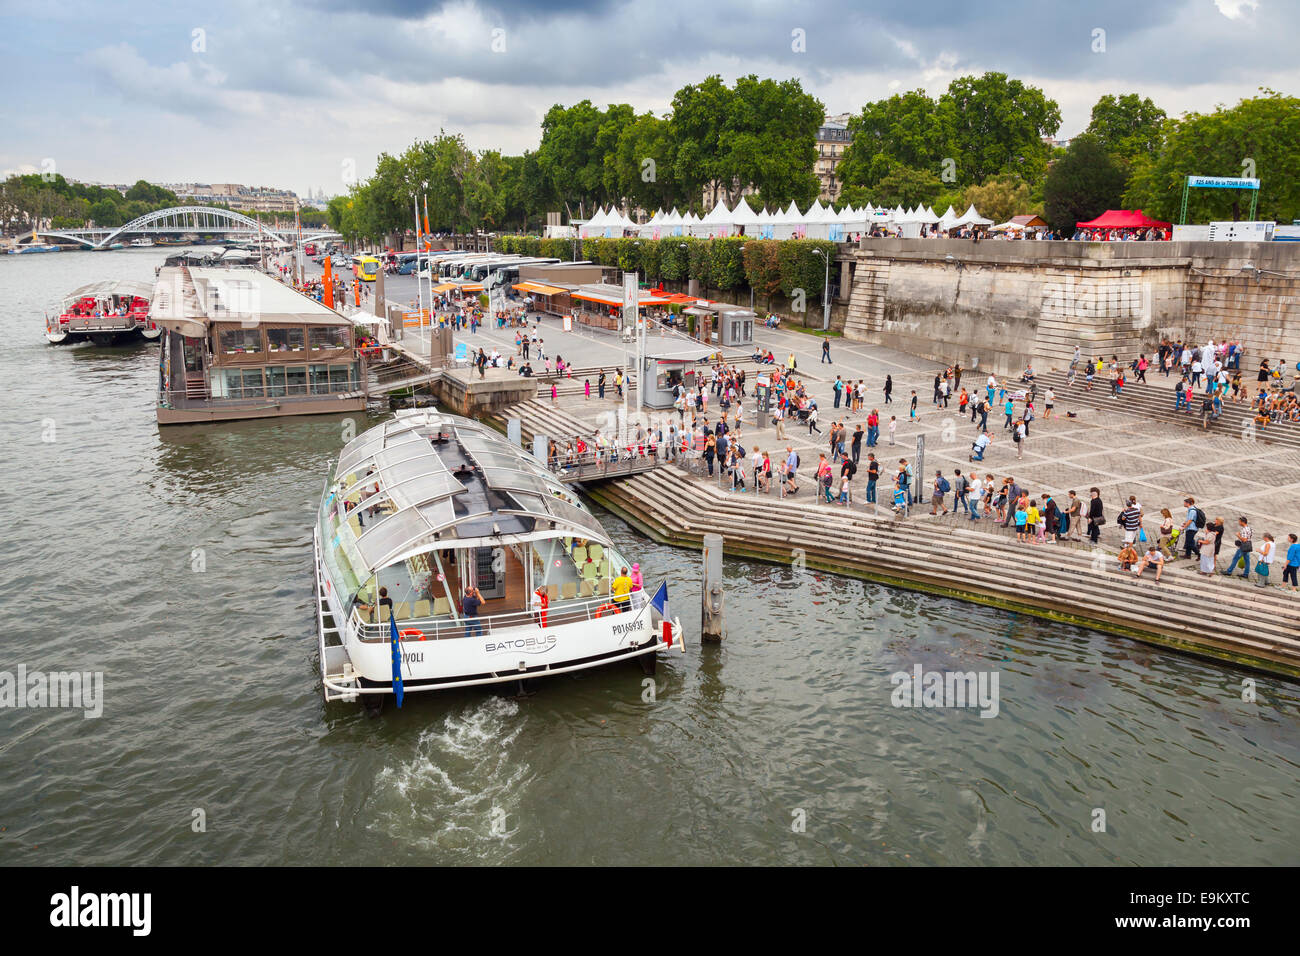 Paris, France - August 07, 2014: passenger touristic ship operated by Batobus Paris is moored to the pier near Eiffel Tower. Peo Stock Photo